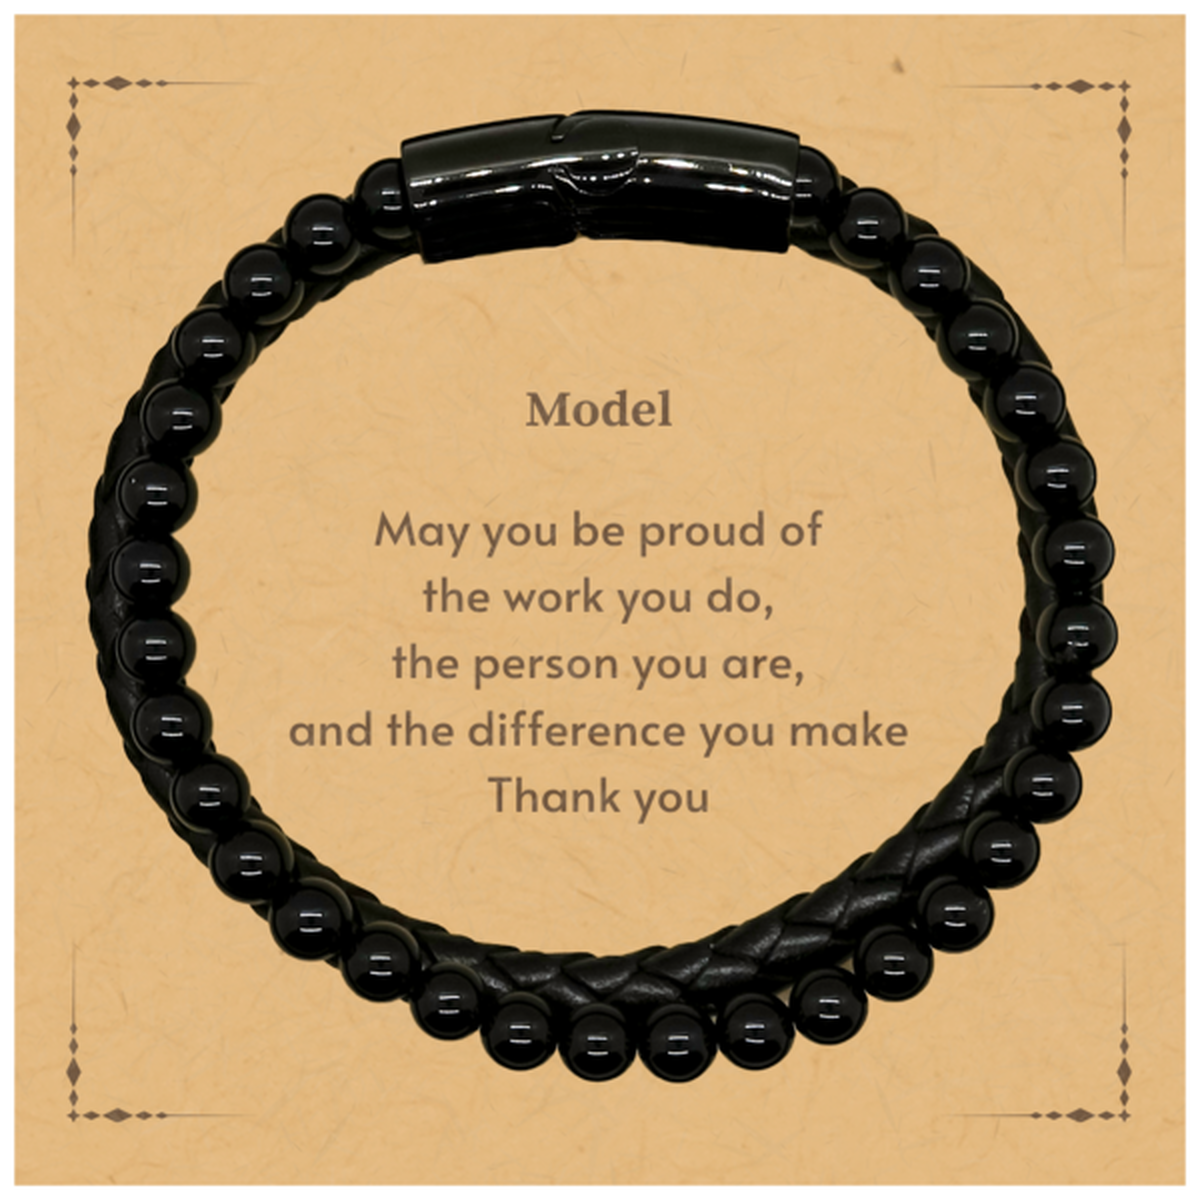 Heartwarming Stone Leather Bracelets Retirement Coworkers Gifts for Model, Model May You be proud of the work you do, the person you are Gifts for Boss Men Women Friends